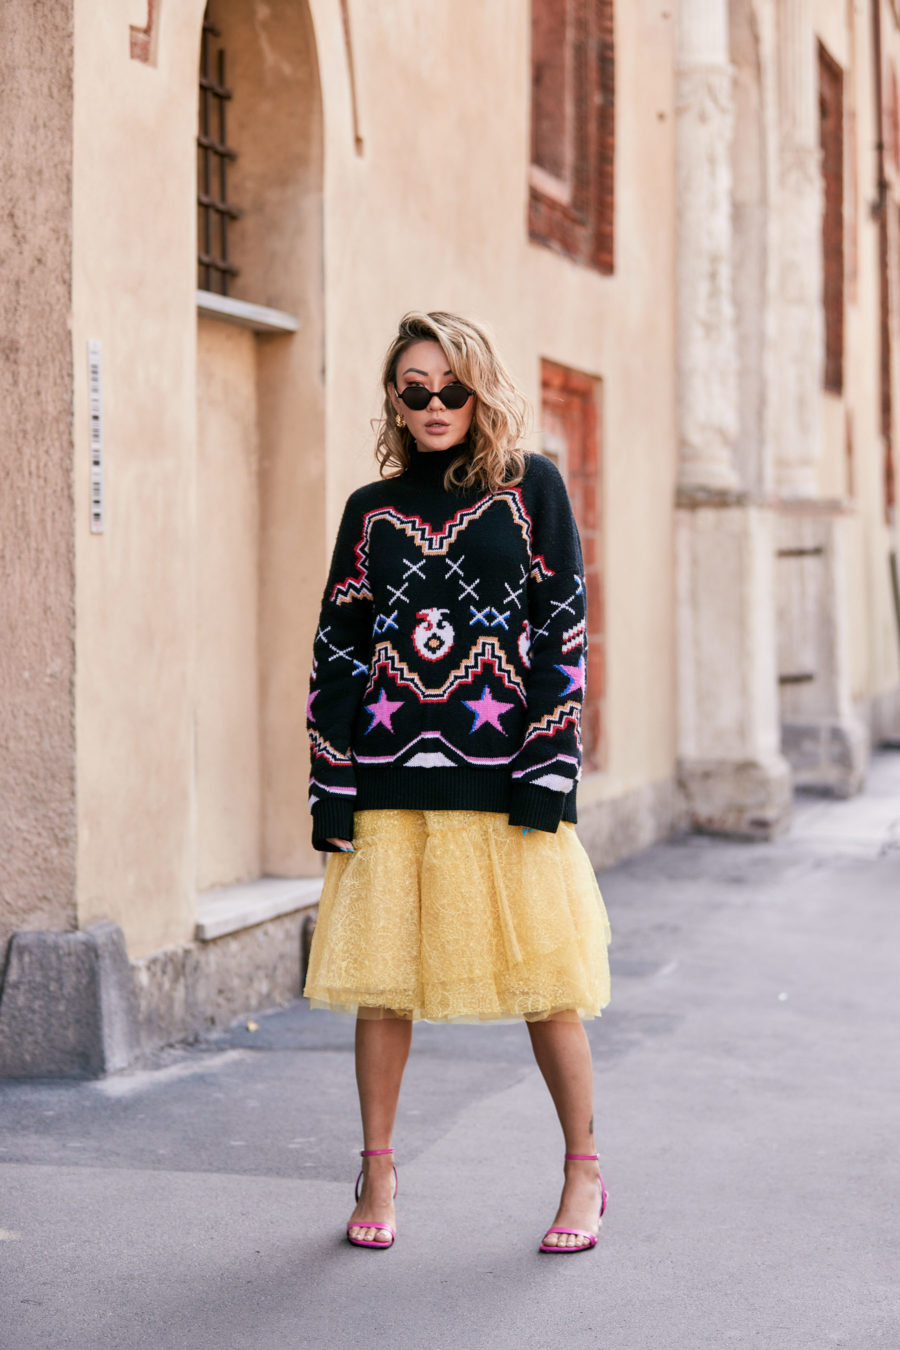 fashion blogger jessica wang shares thanksgiving day outfit ideas and wears a tulle skirt with a large graphic sweater // Notjessfashion.com